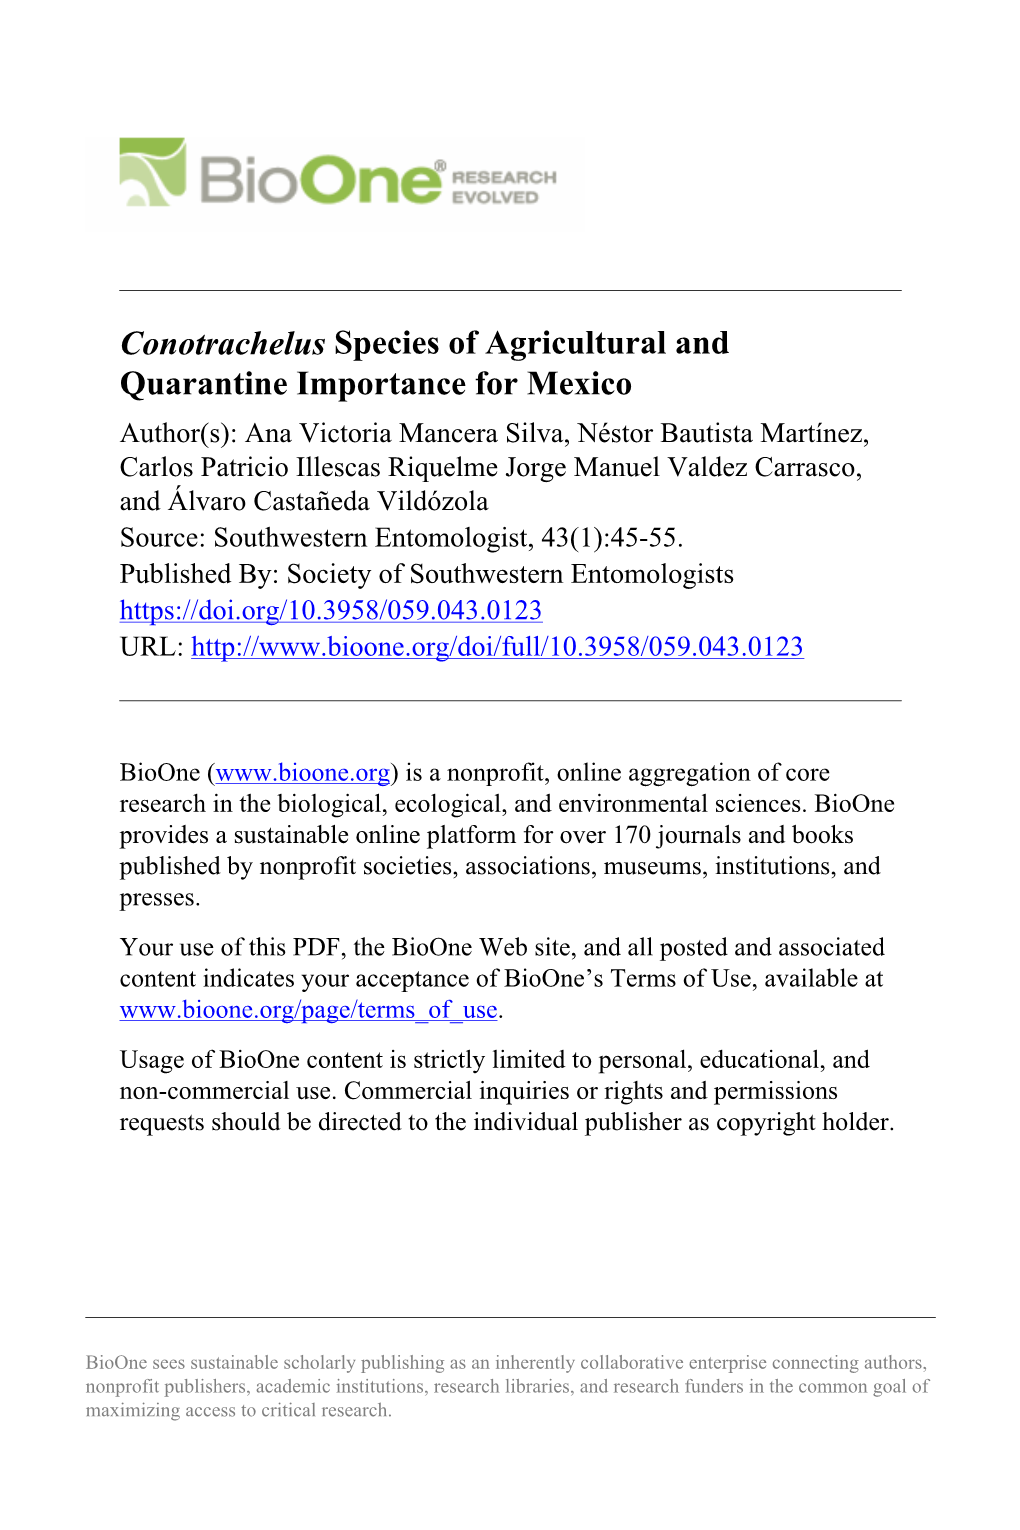 Conotrachelus Species of Agricultural and Quarantine Importance For